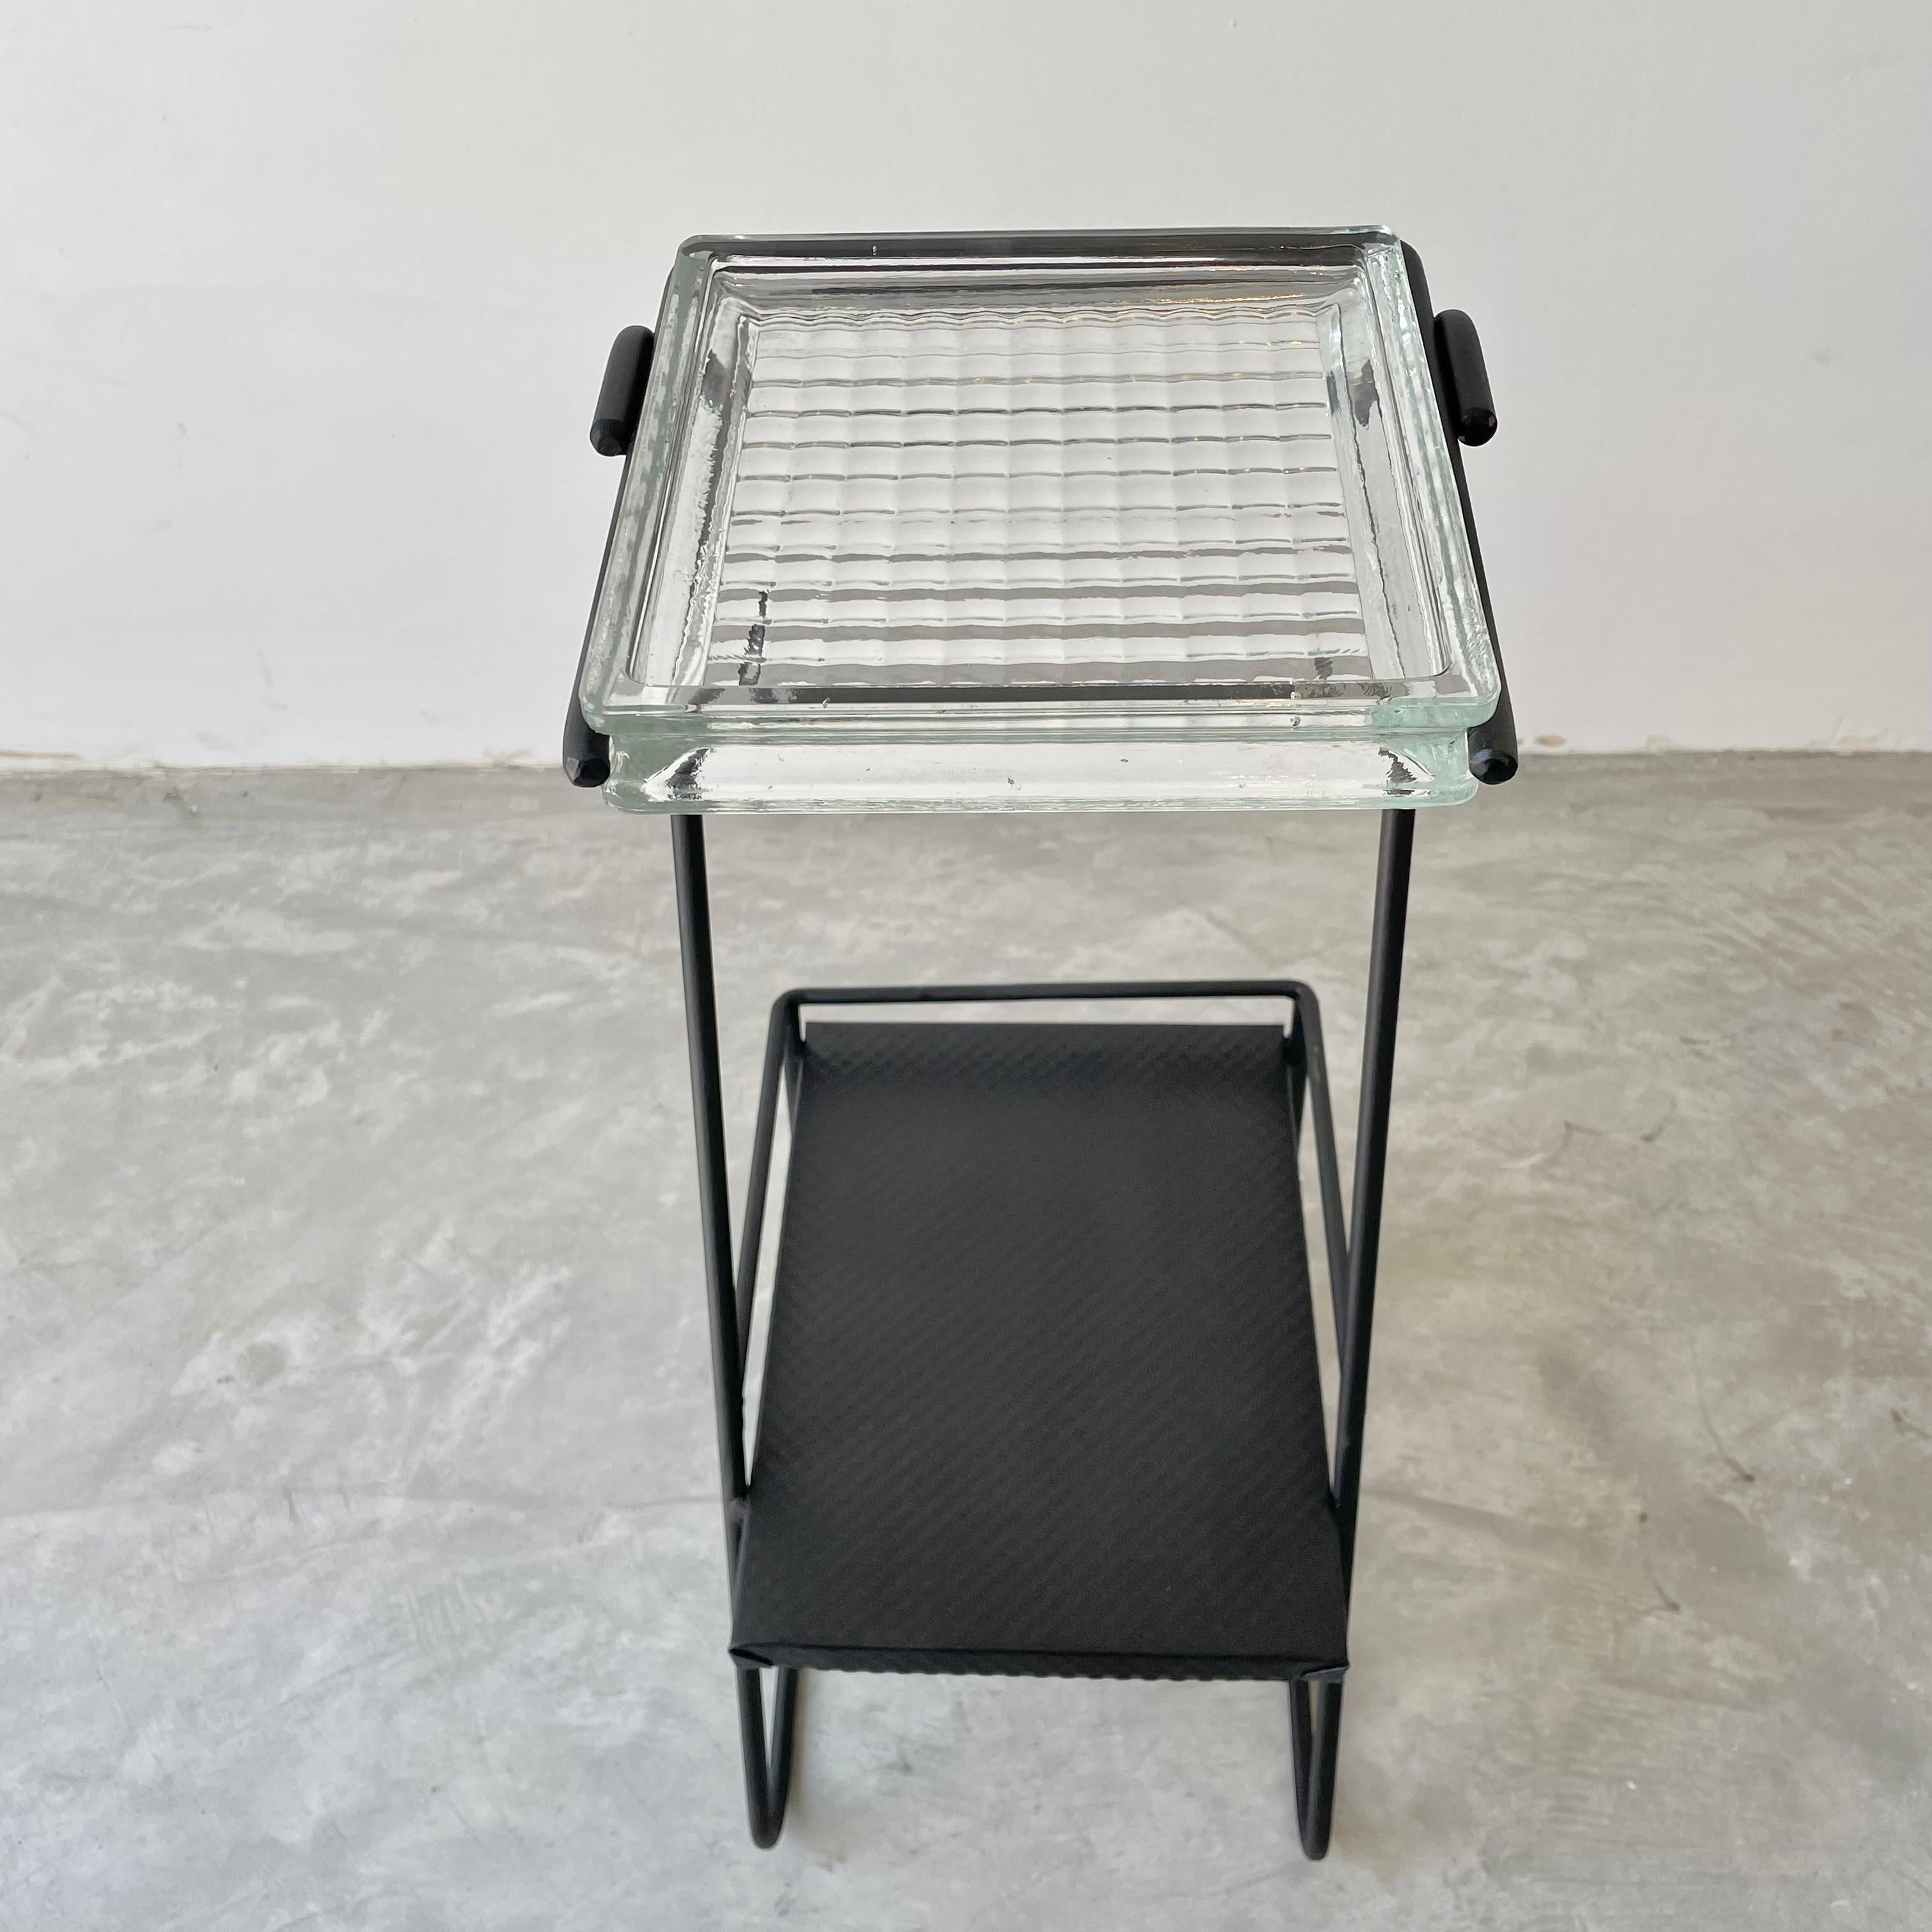 Beautiful two tiered side table/ashtray in a jet black iron frame. Upper level is a thick glass catchall held by two metal prongs. The bottom table is a textured black metal. Elegant and modern design perfectly contrasted with rustic materials and